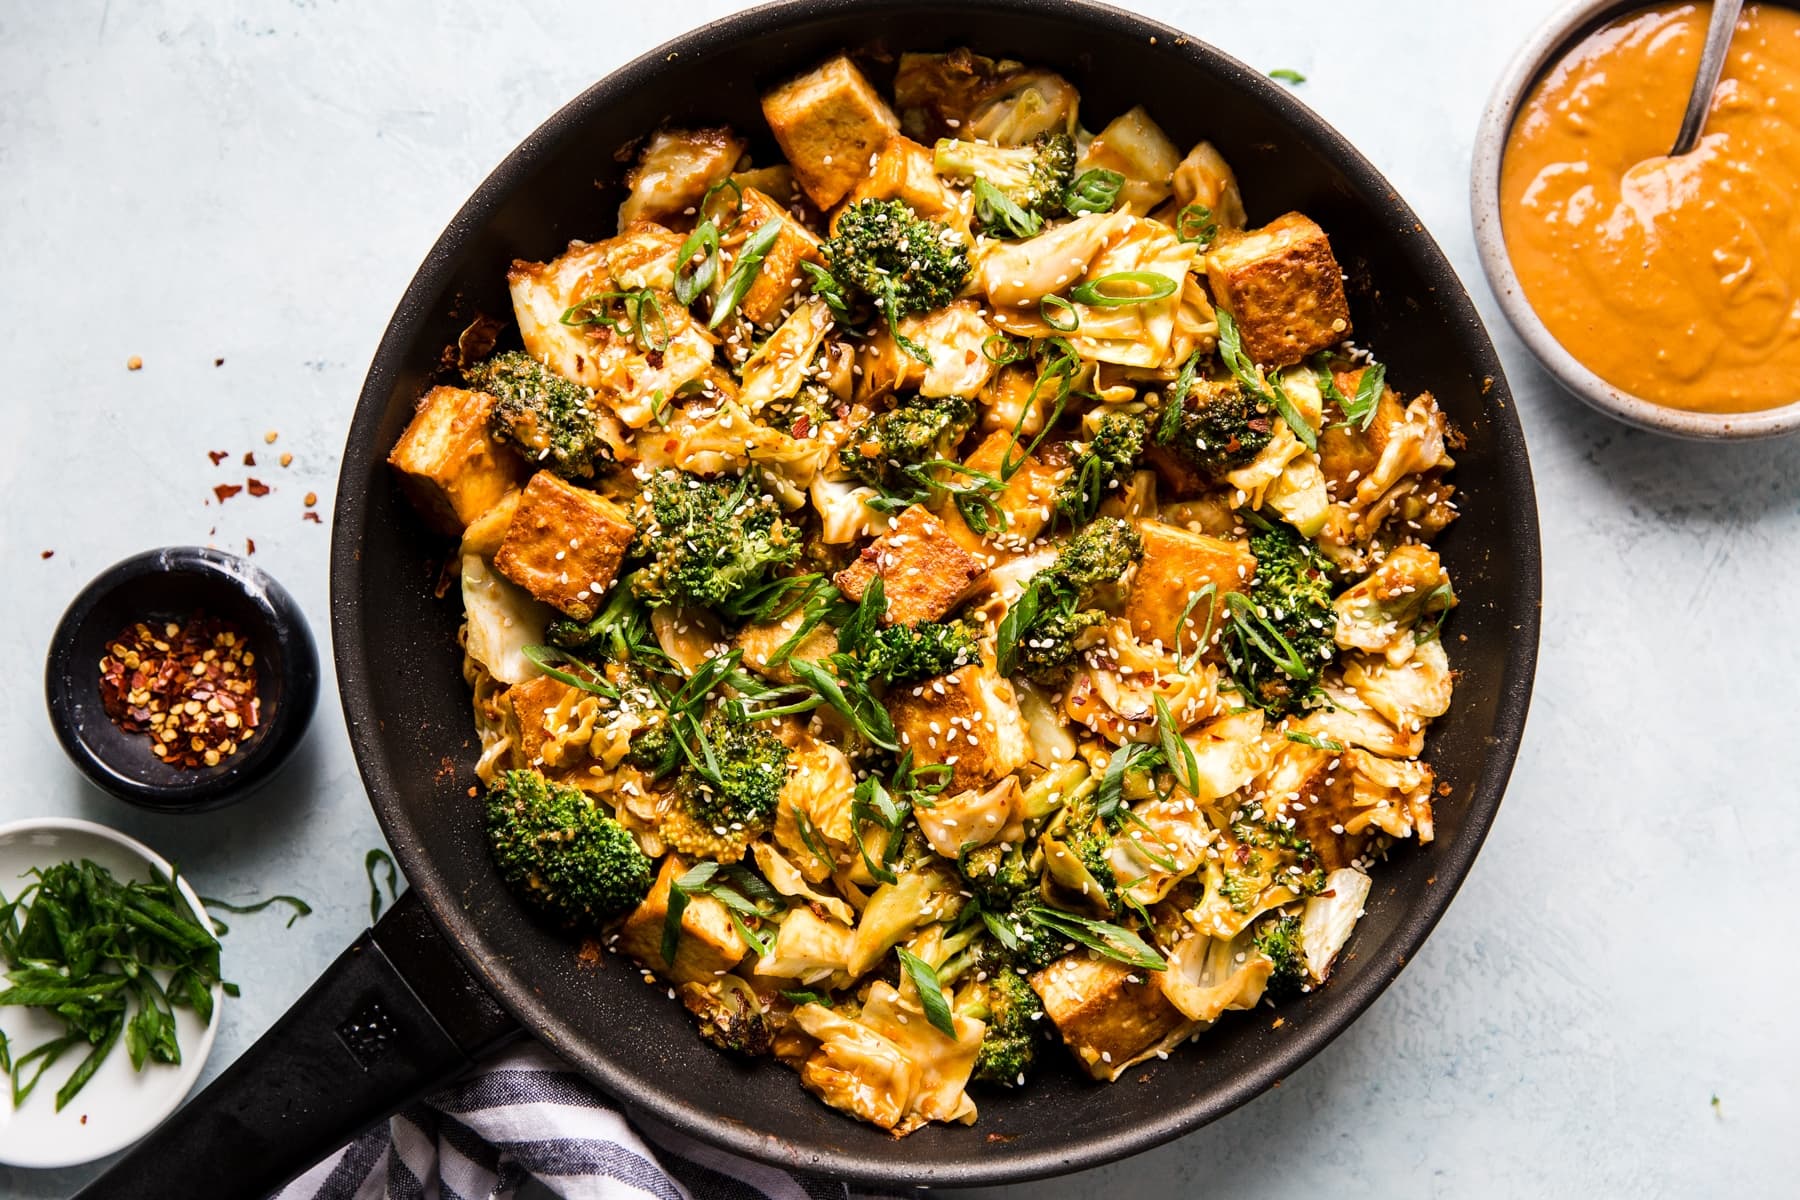 Tofu Stir-Fry with Vegetables and Peanut Sauce | The Modern Proper